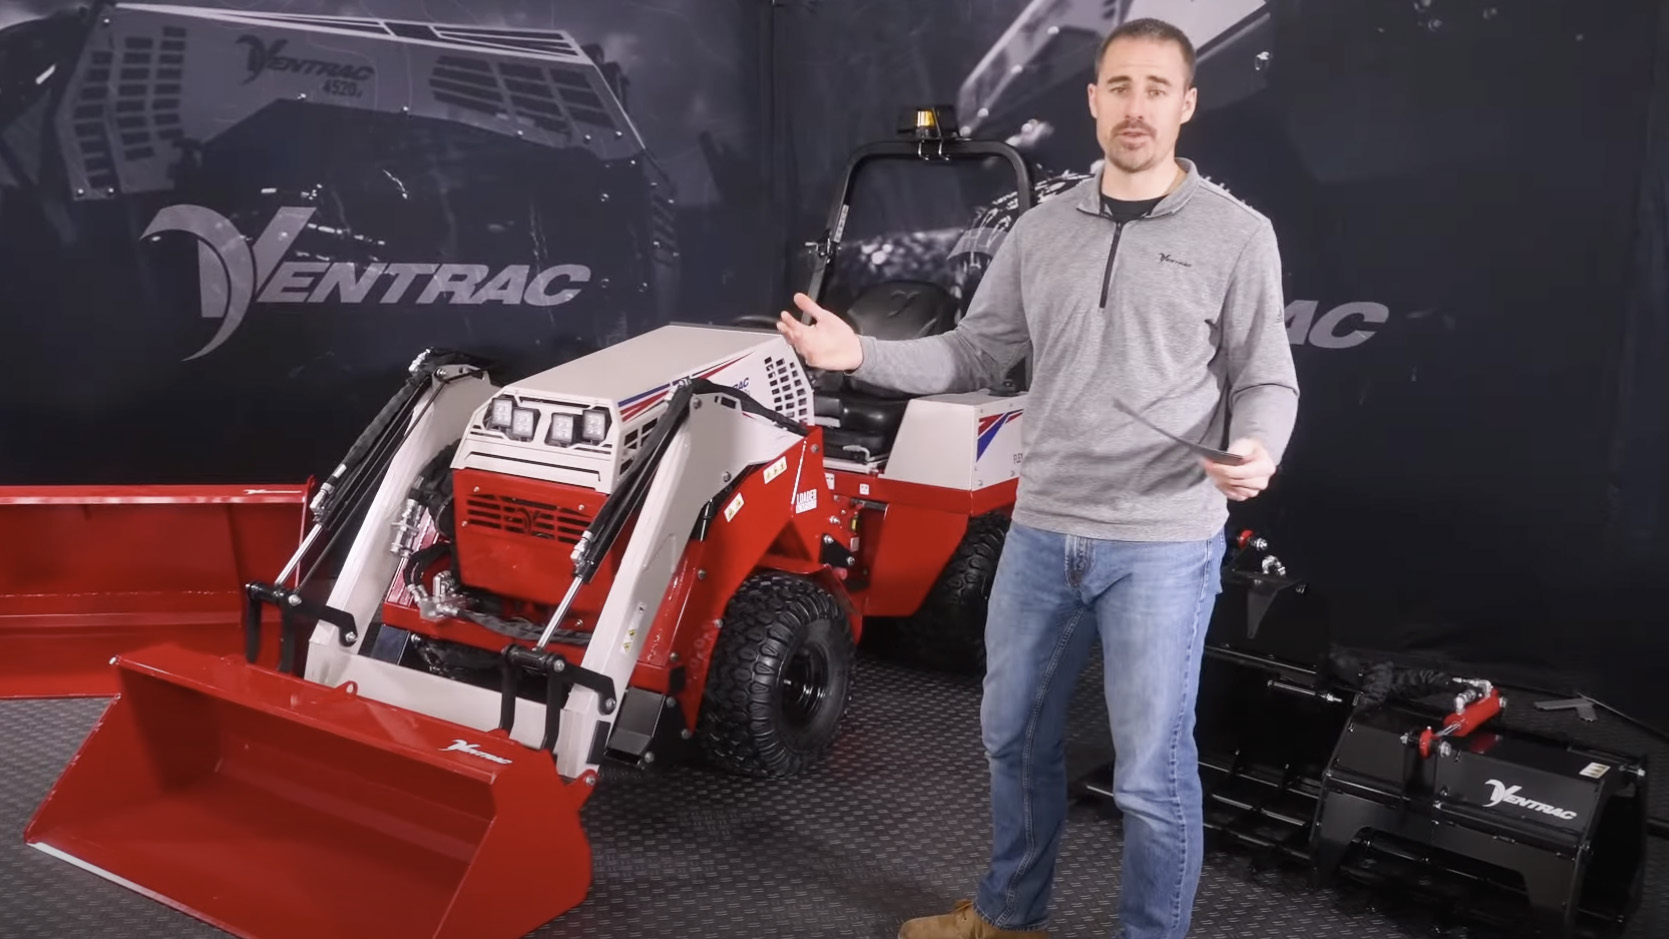 New Ventrac KM500 Loader Live Product Release